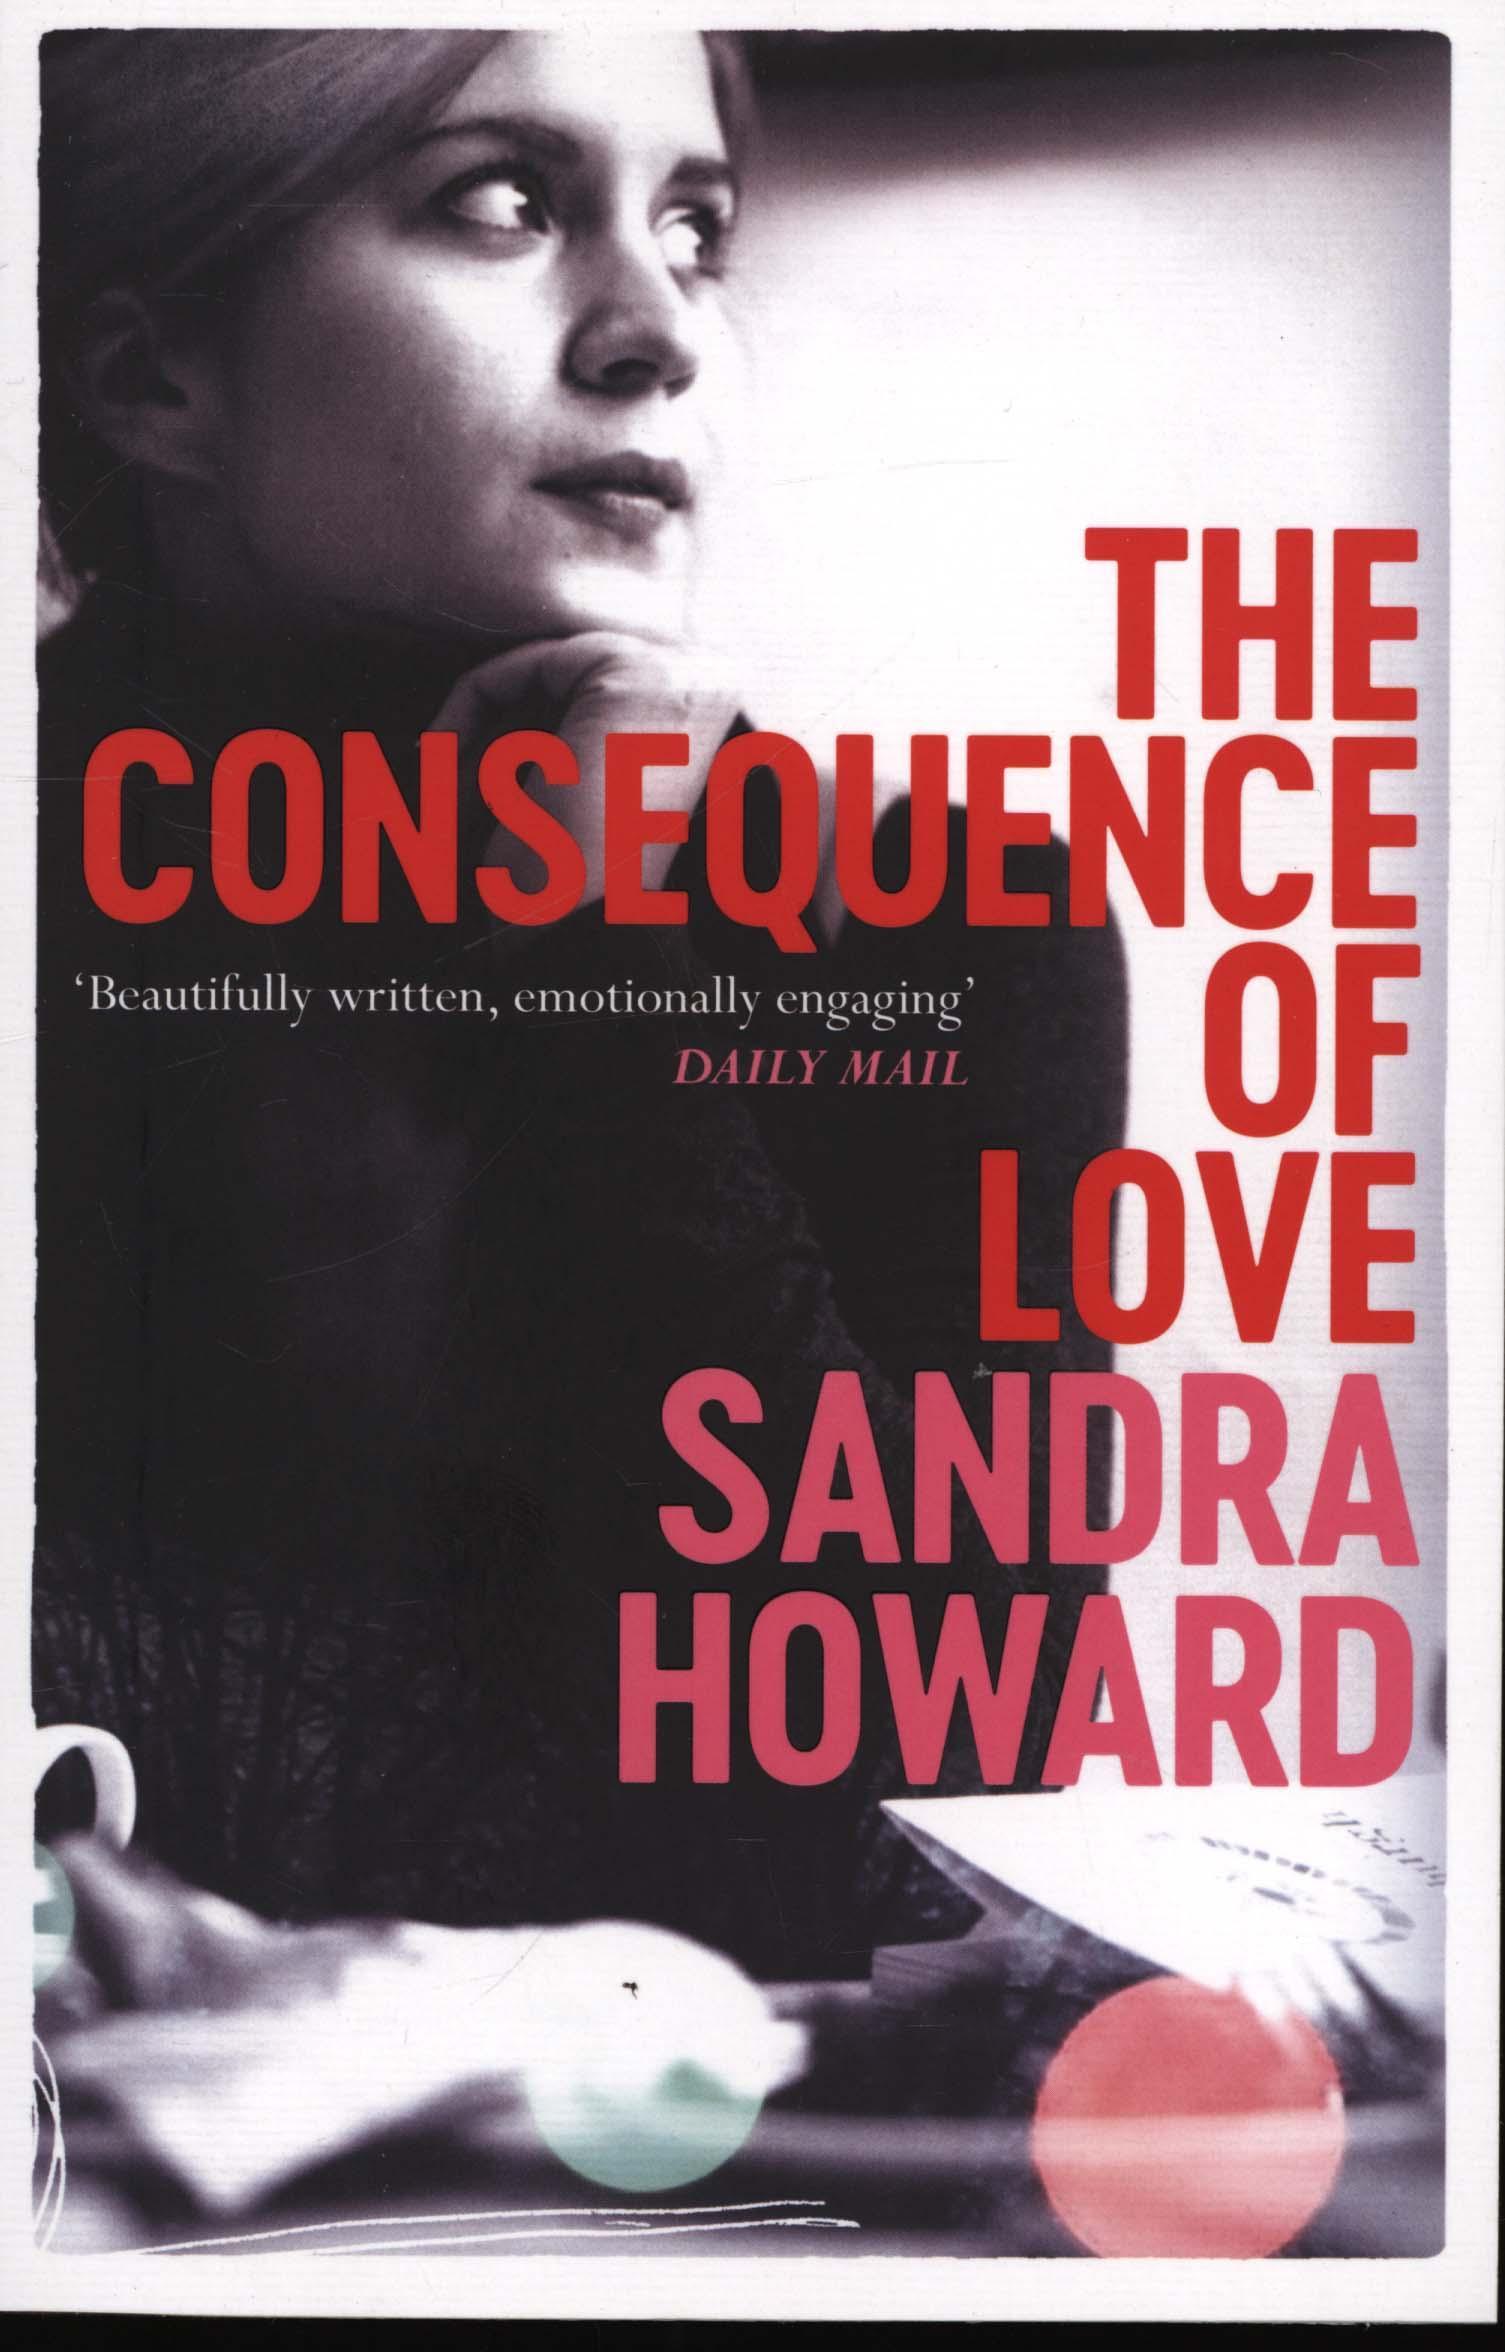 Consequence of Love